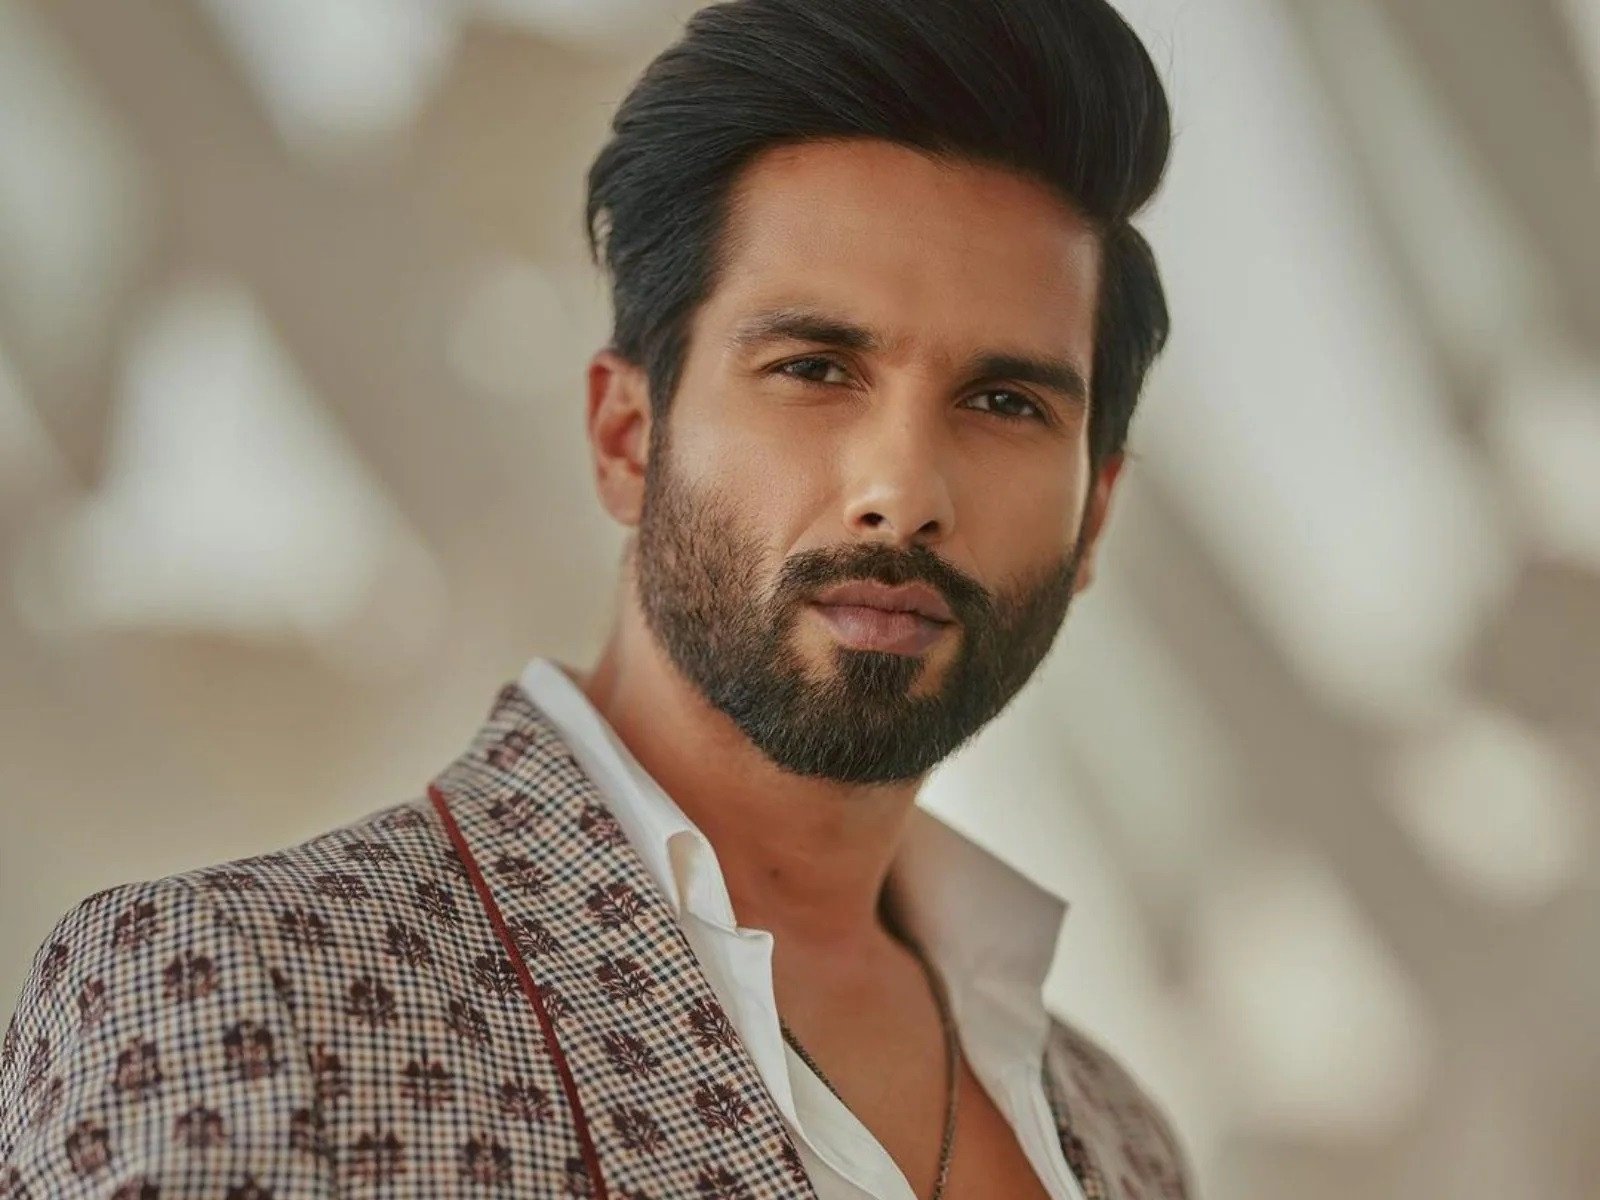 Shahid Kapoor lands into hot water for his remarks on women’s role in marriage